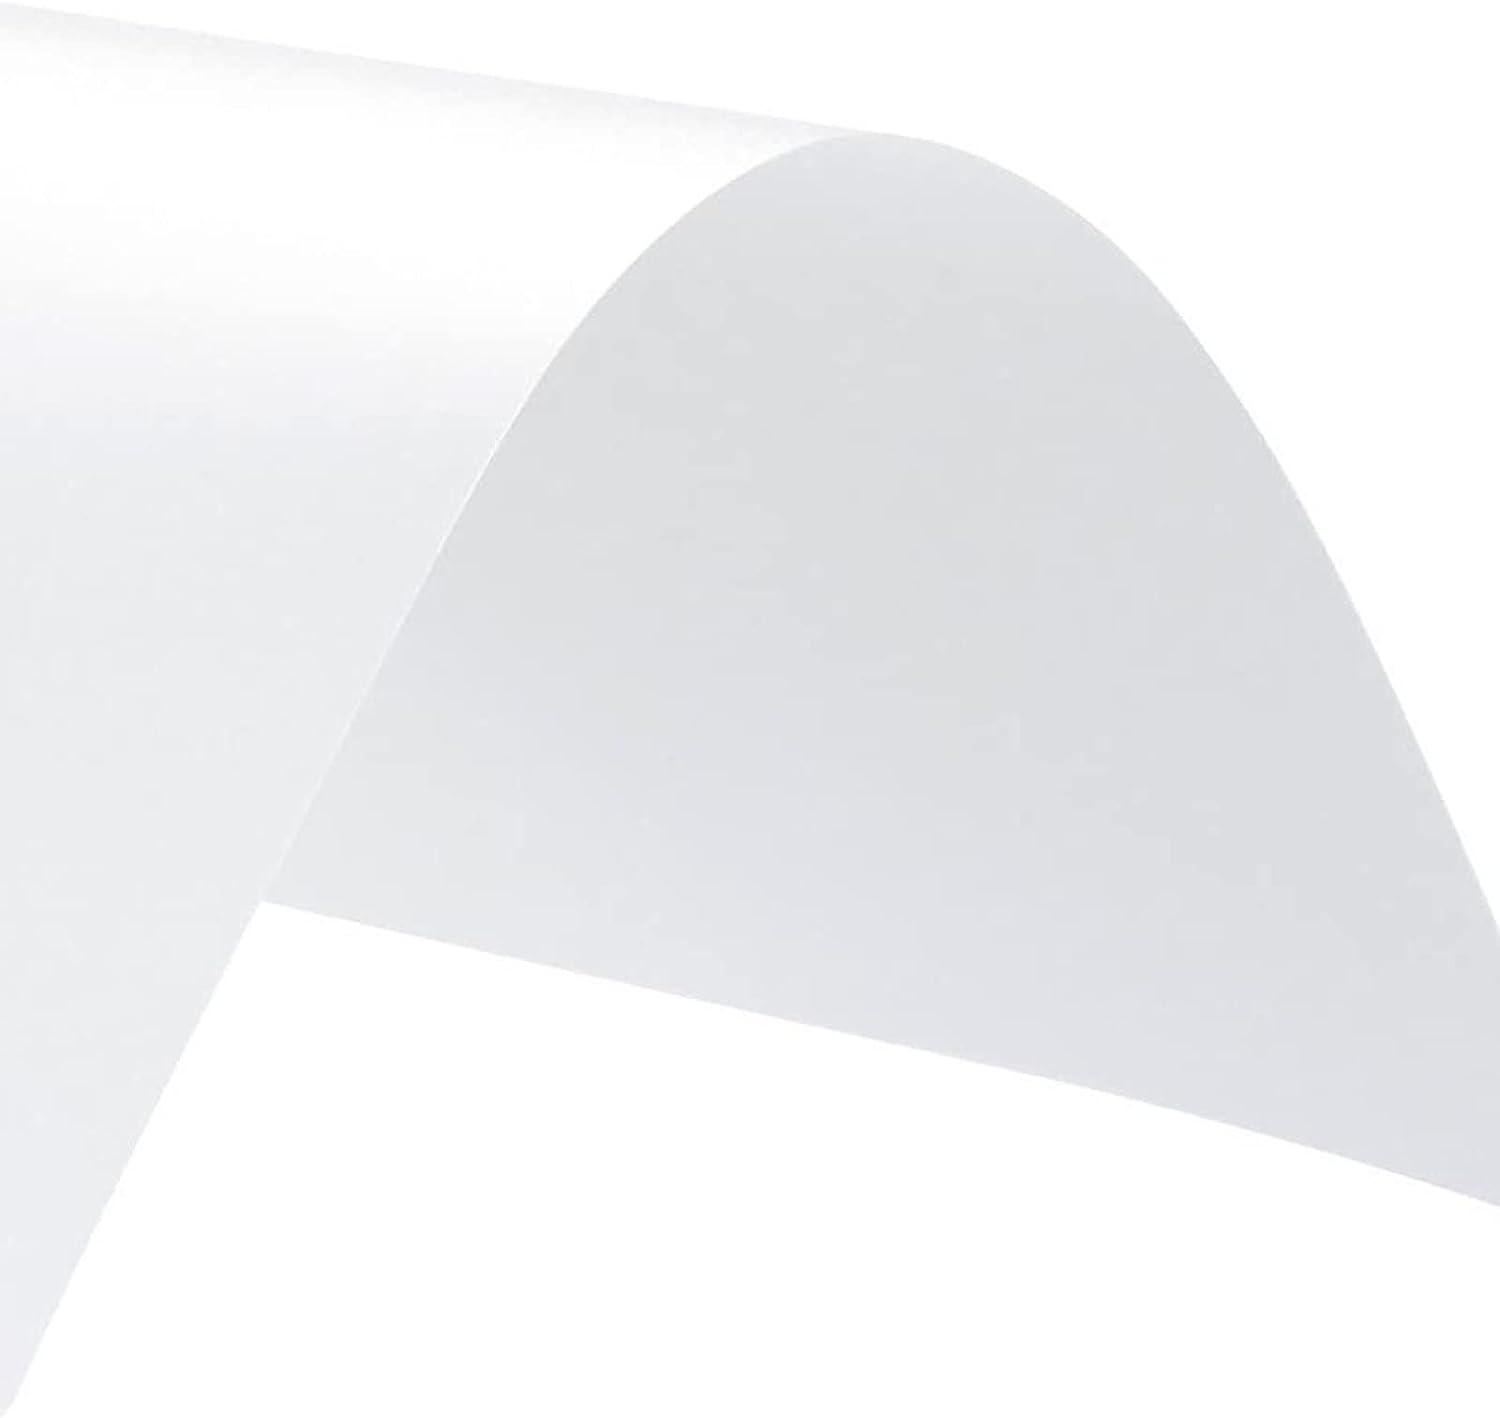 Translucent Vellum Paper 8.5 X 11 in Tracing Paper Drawing Printable  93GSM/100g Vellum Paper for Printing Sketching - China Tracing Paper,  Plotter Paper